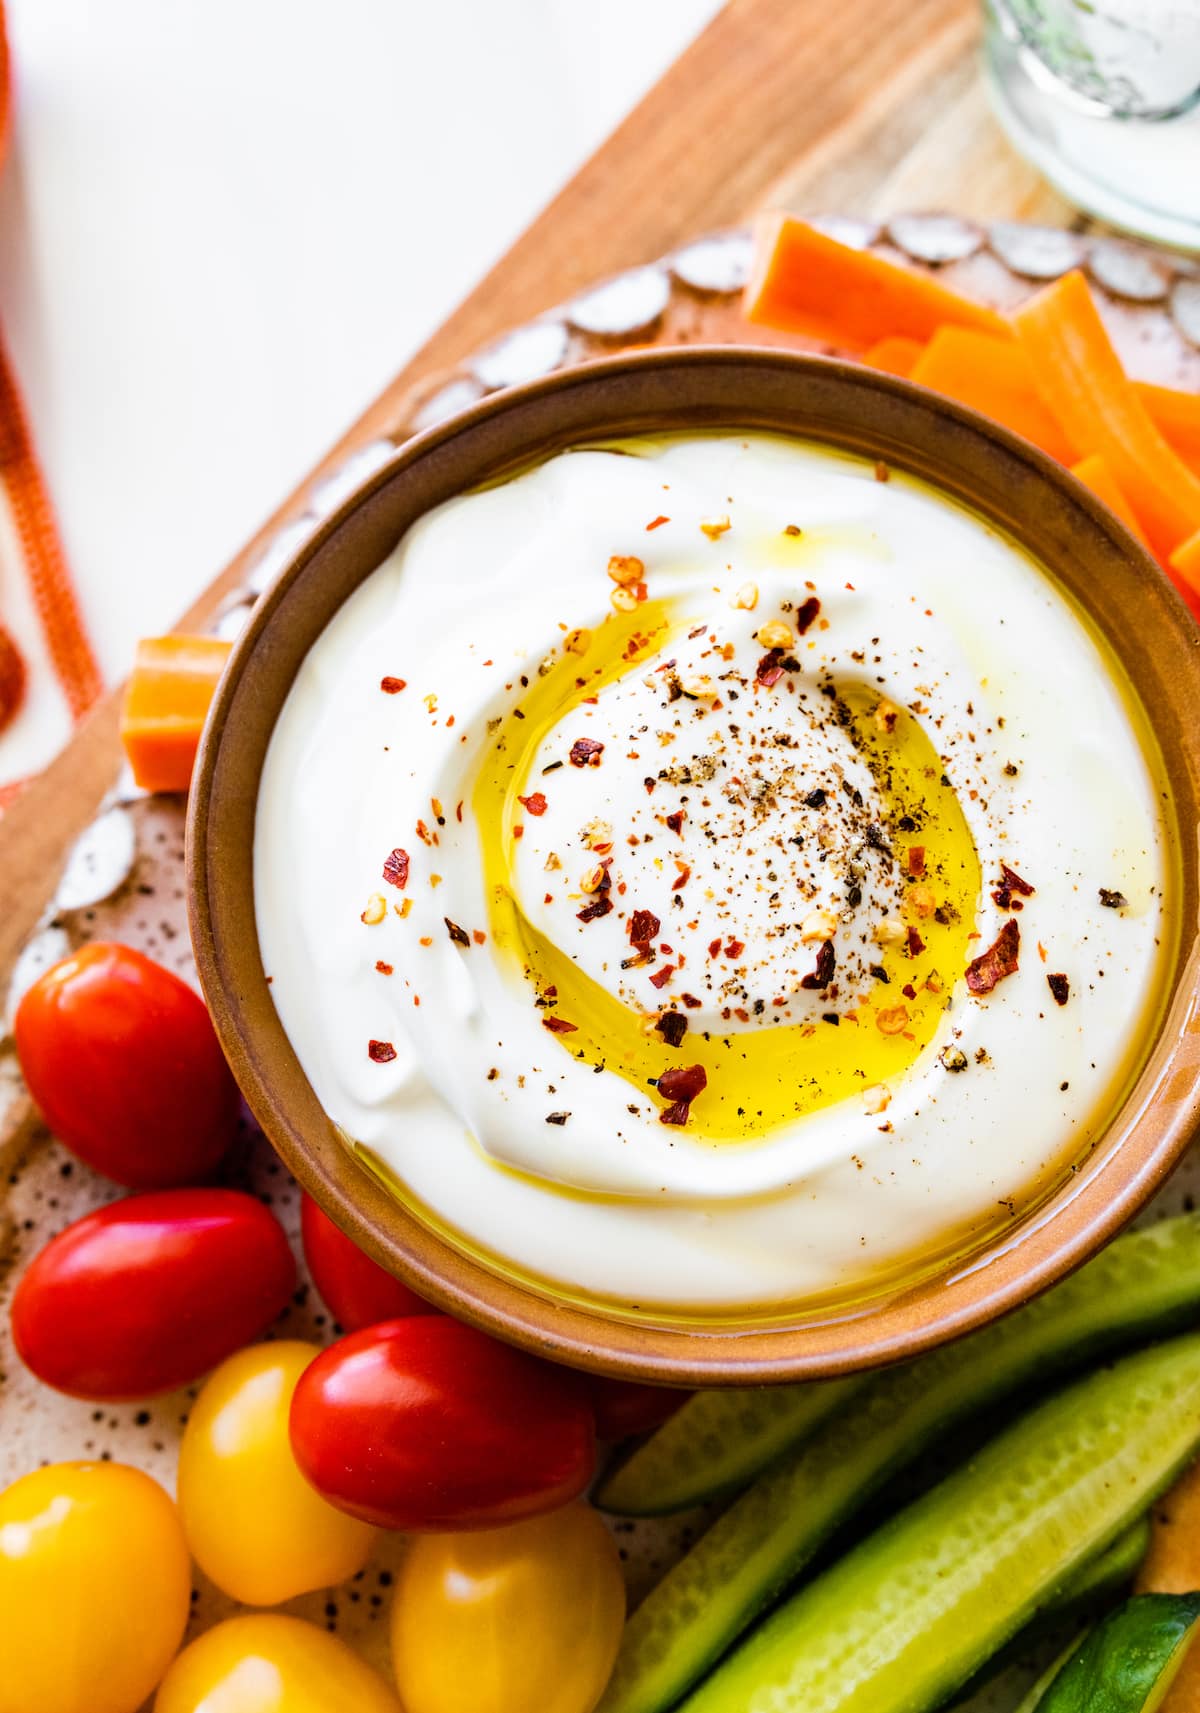 Mustard Cottage Cheese Dip - This Healthy Table